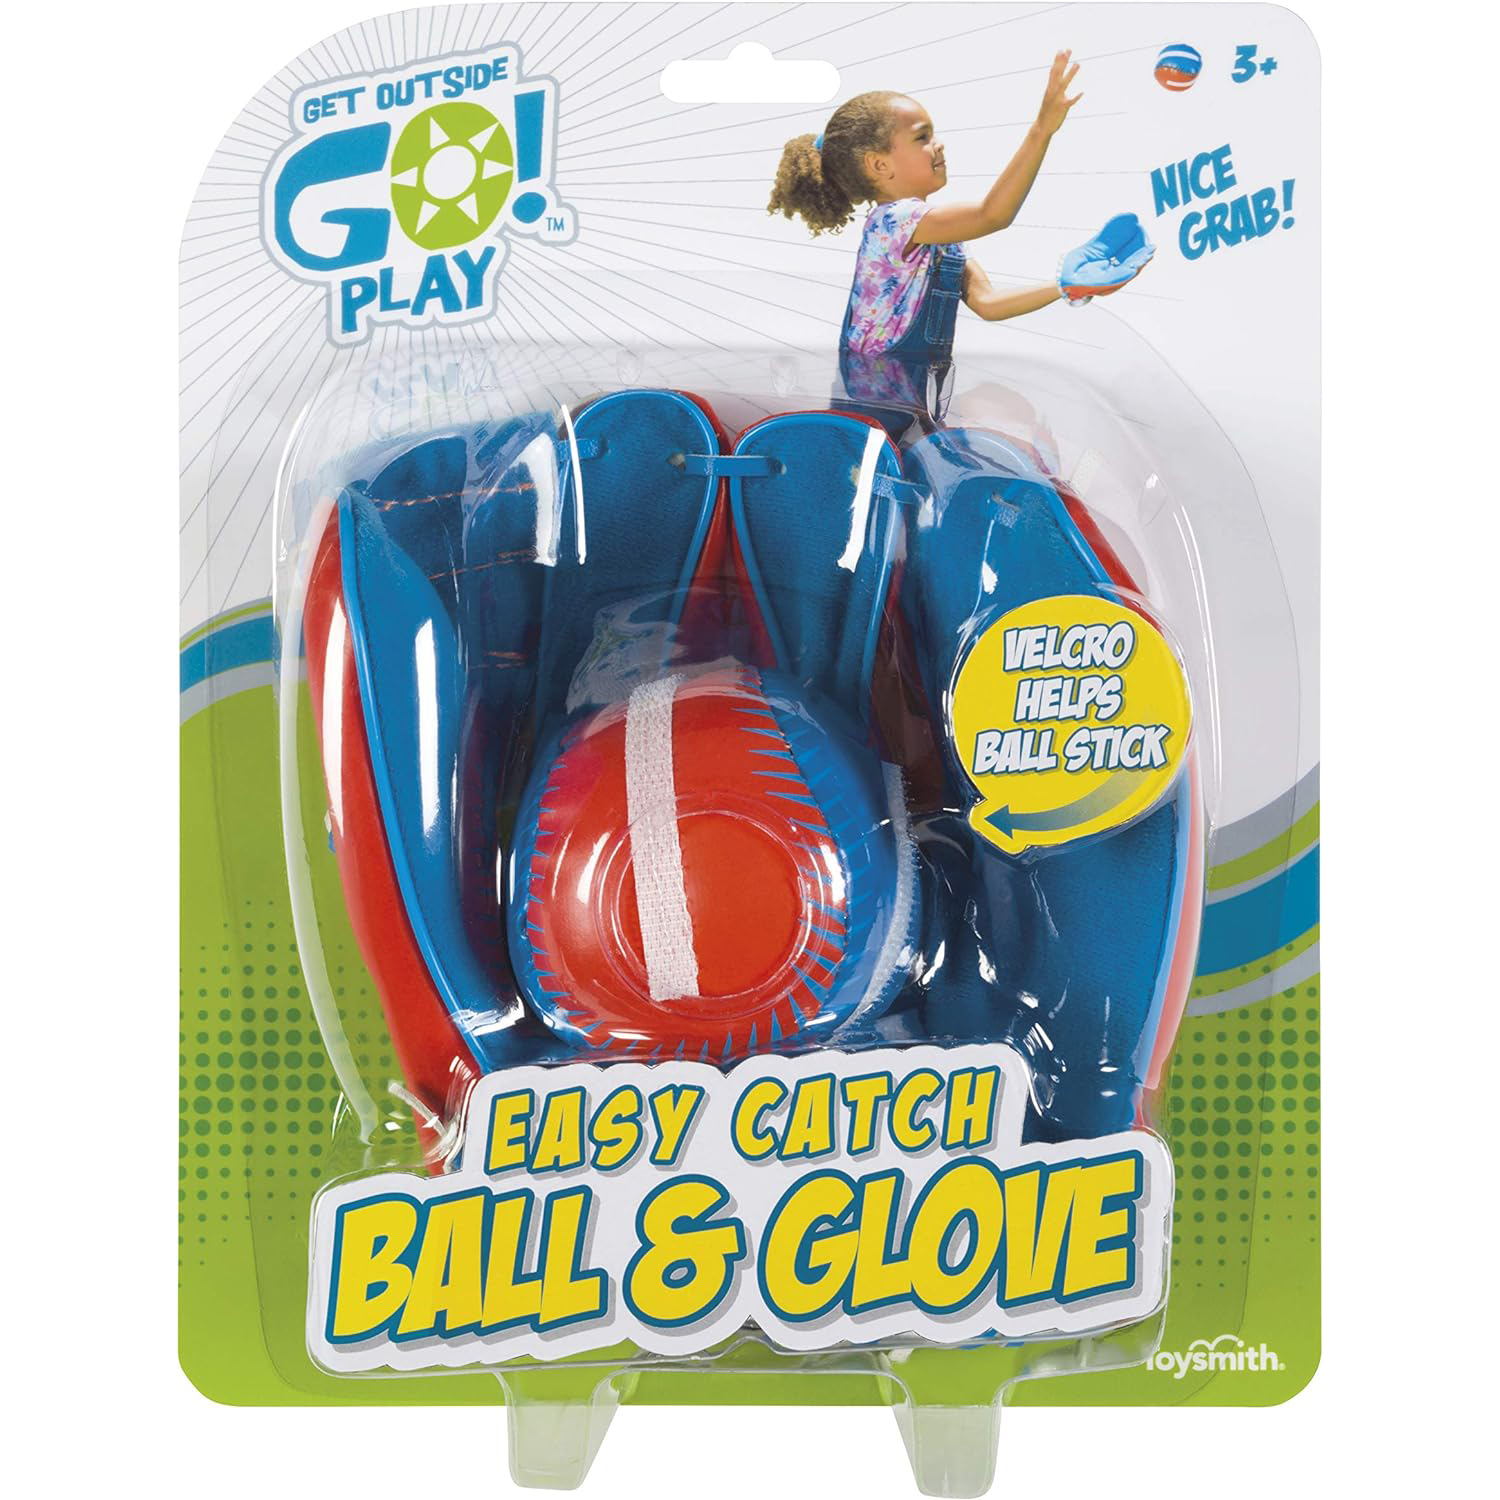 fun outdoor toys for kids - baseball ball and glove